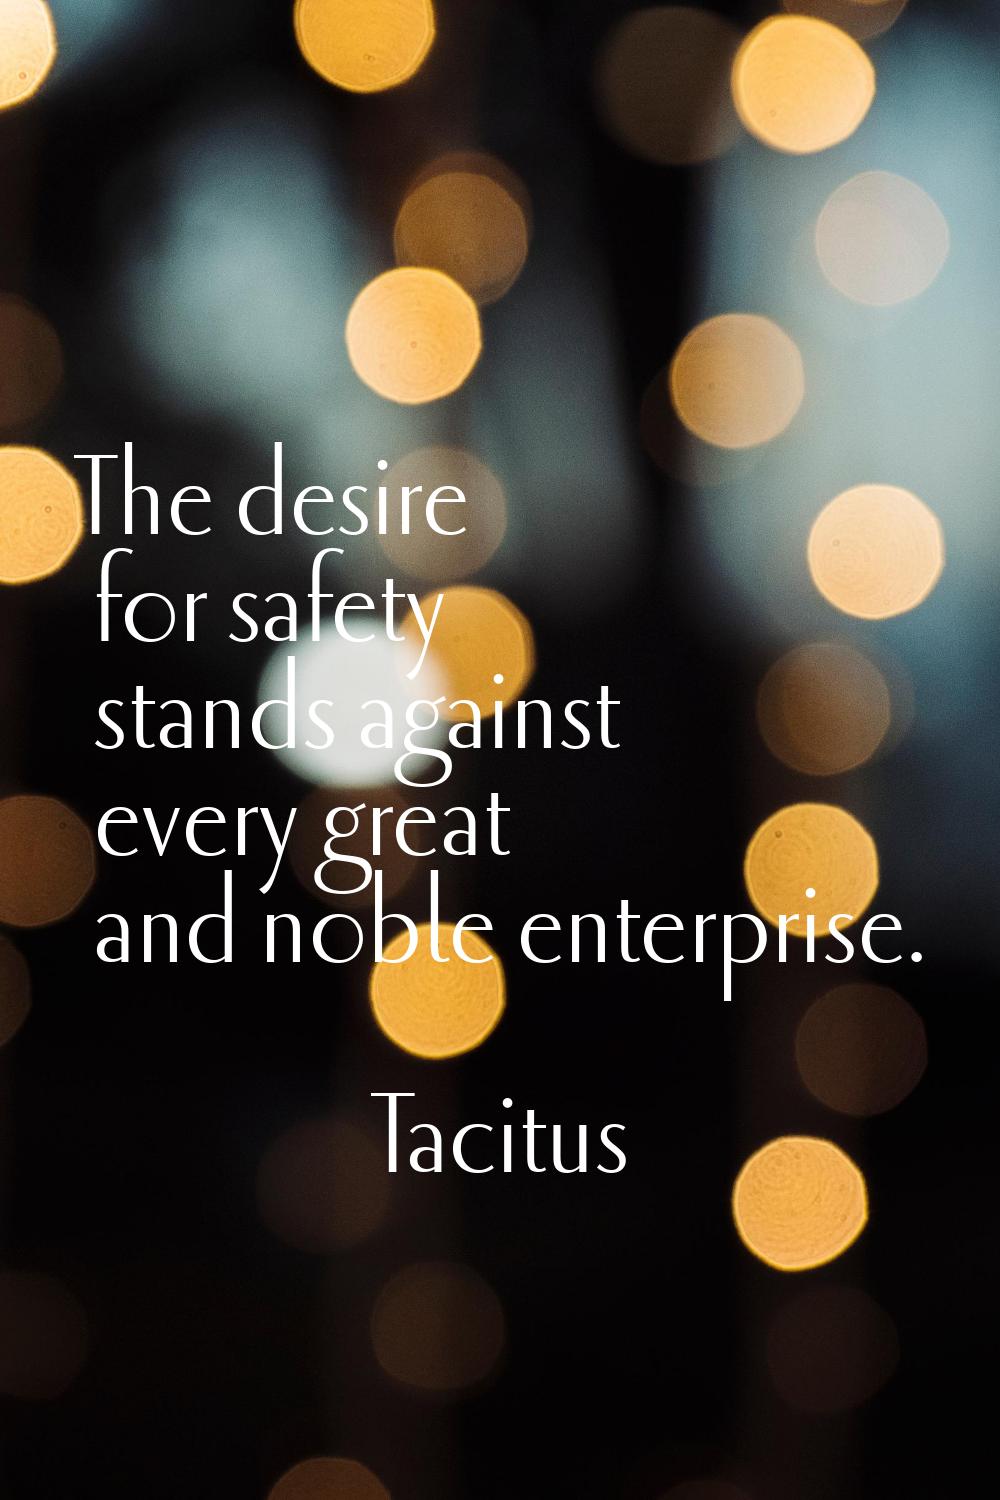 The desire for safety stands against every great and noble enterprise.